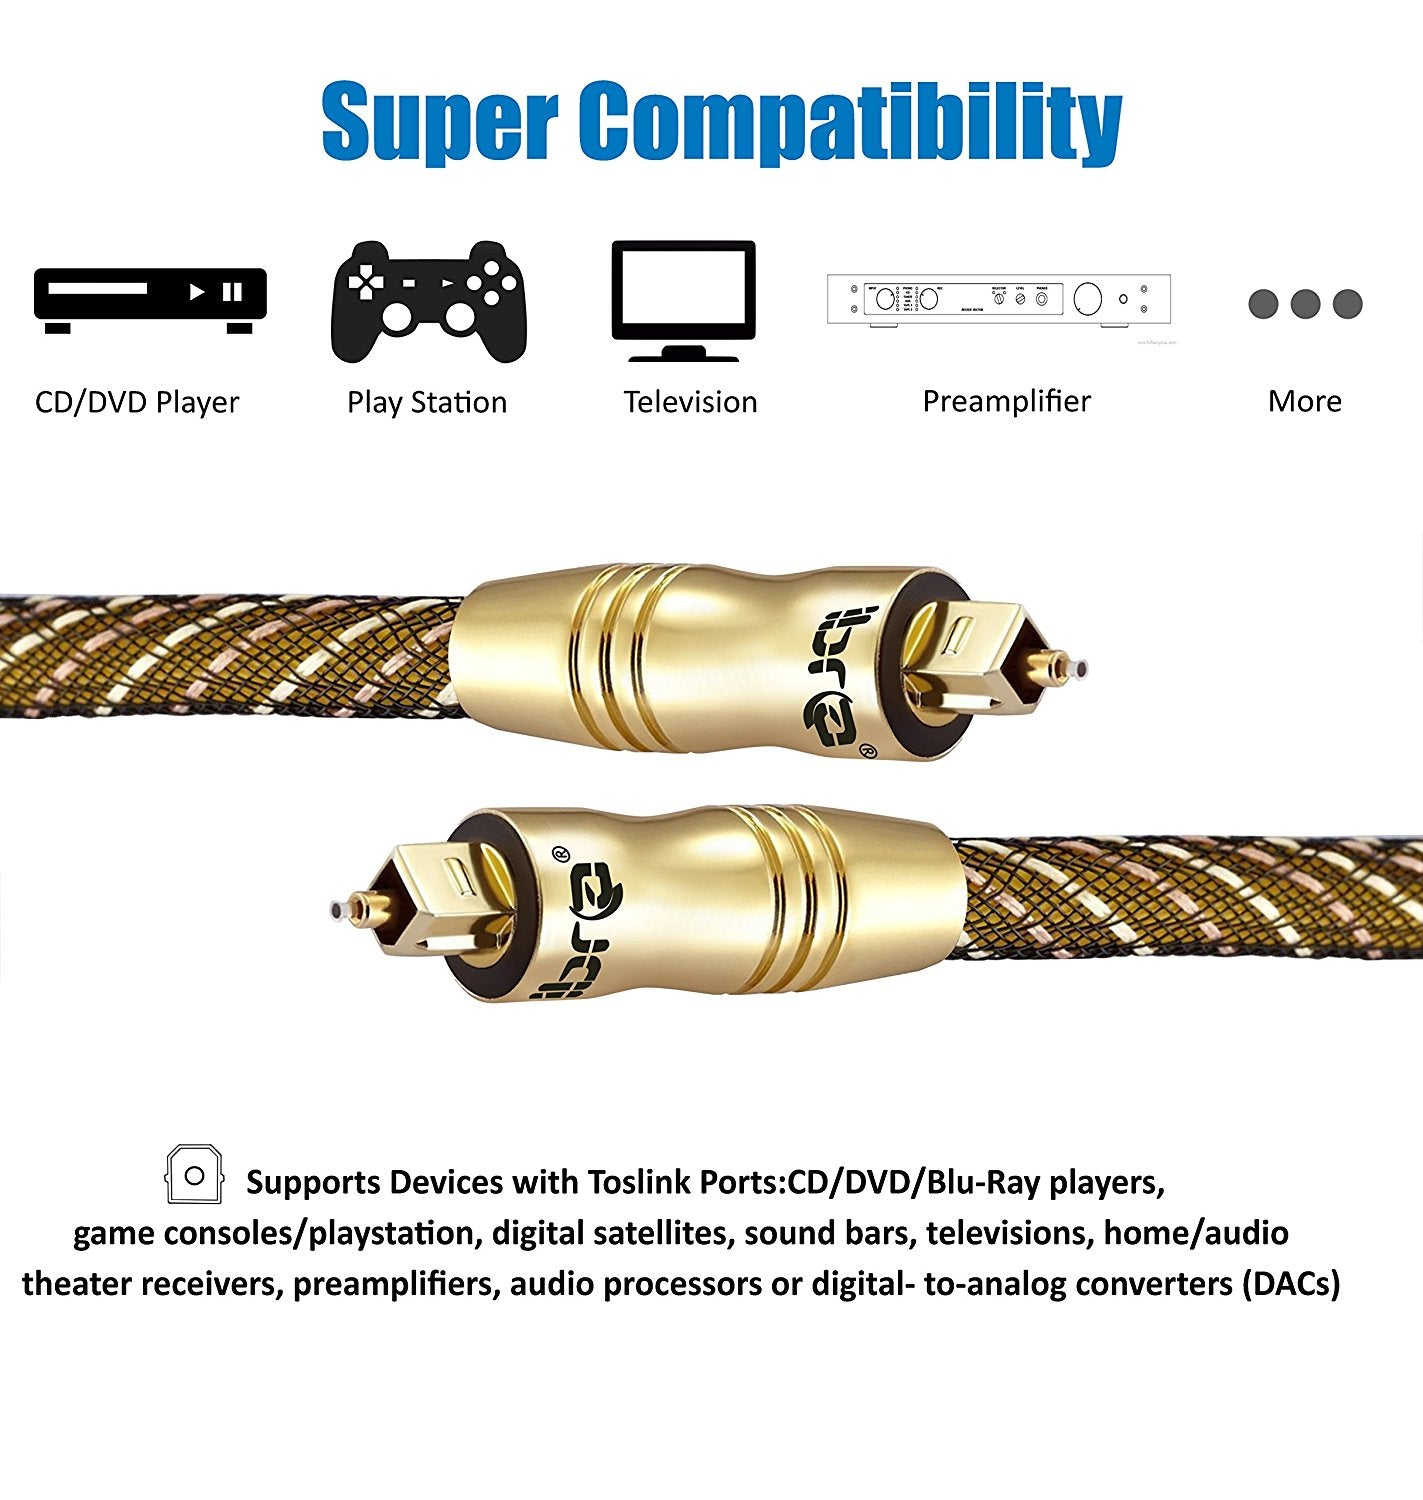 IBRA 15M Master Gold Optical TOSLINK Digital Audio Cable - Suitable for PS3, Sky, Sky HD, LCD, LED, Plasma, Blu-ray, Home Cinema Systems, AV Amps